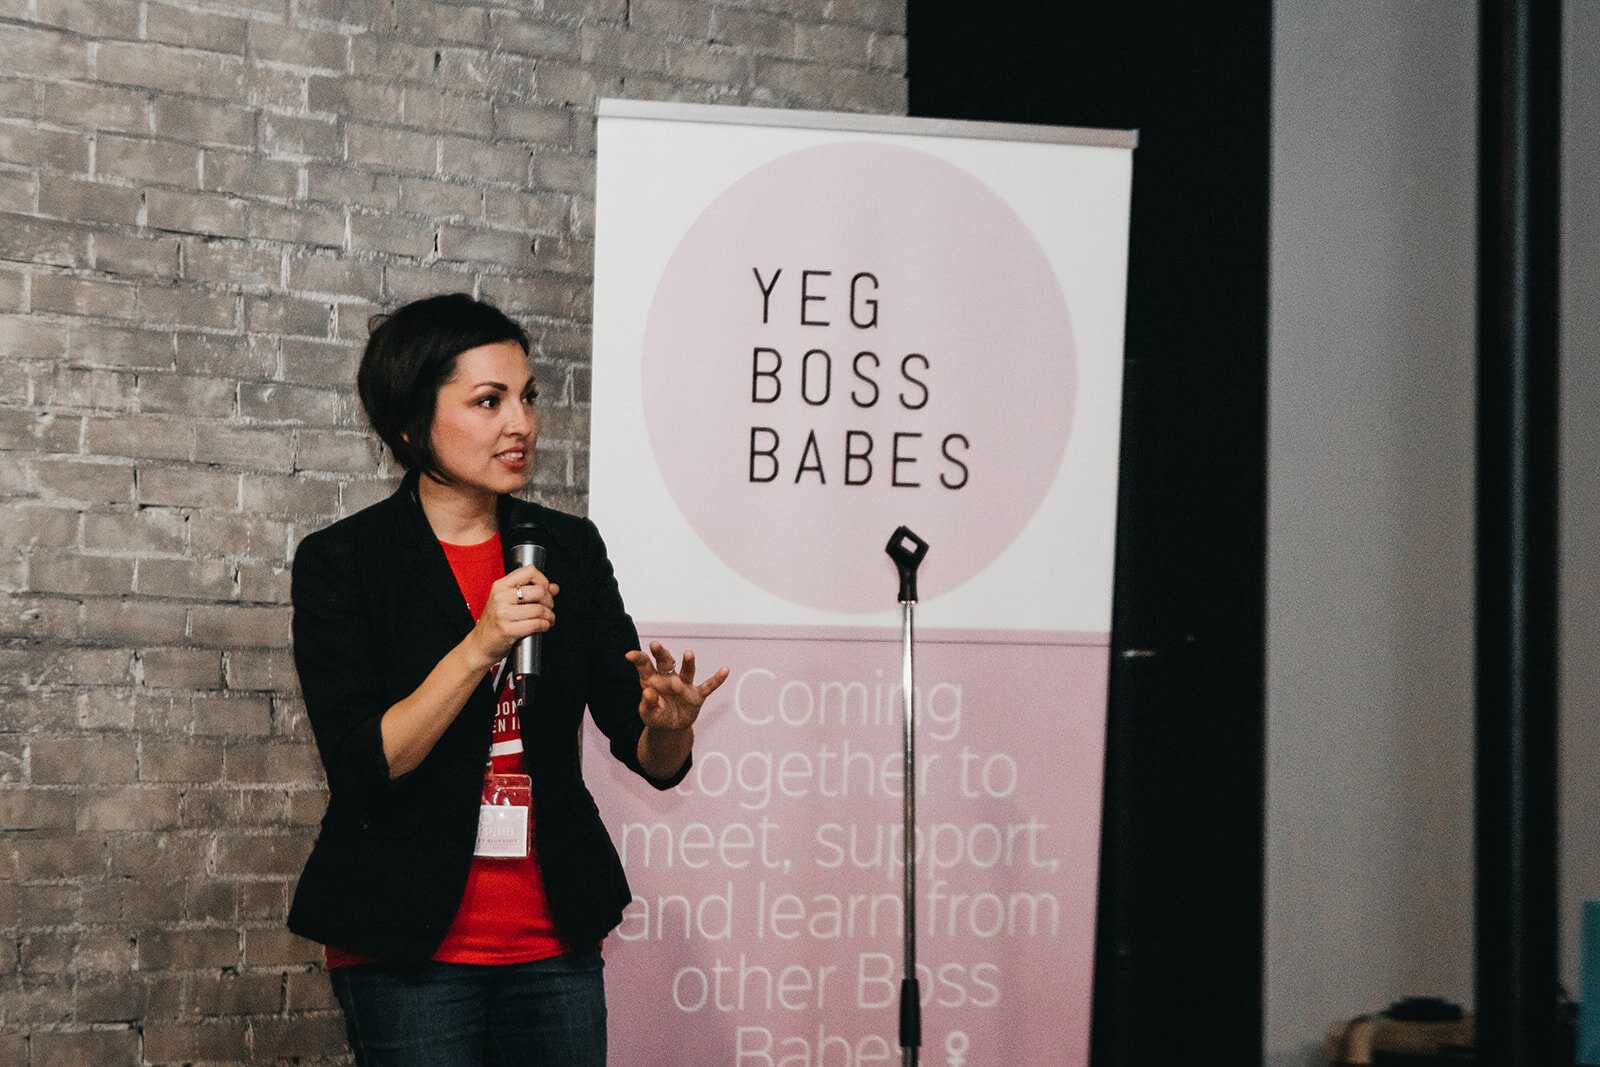 YEGBOSSBABES_2019_Fall_Mixer___Photo_by_Nicole_Constante-36.jpg